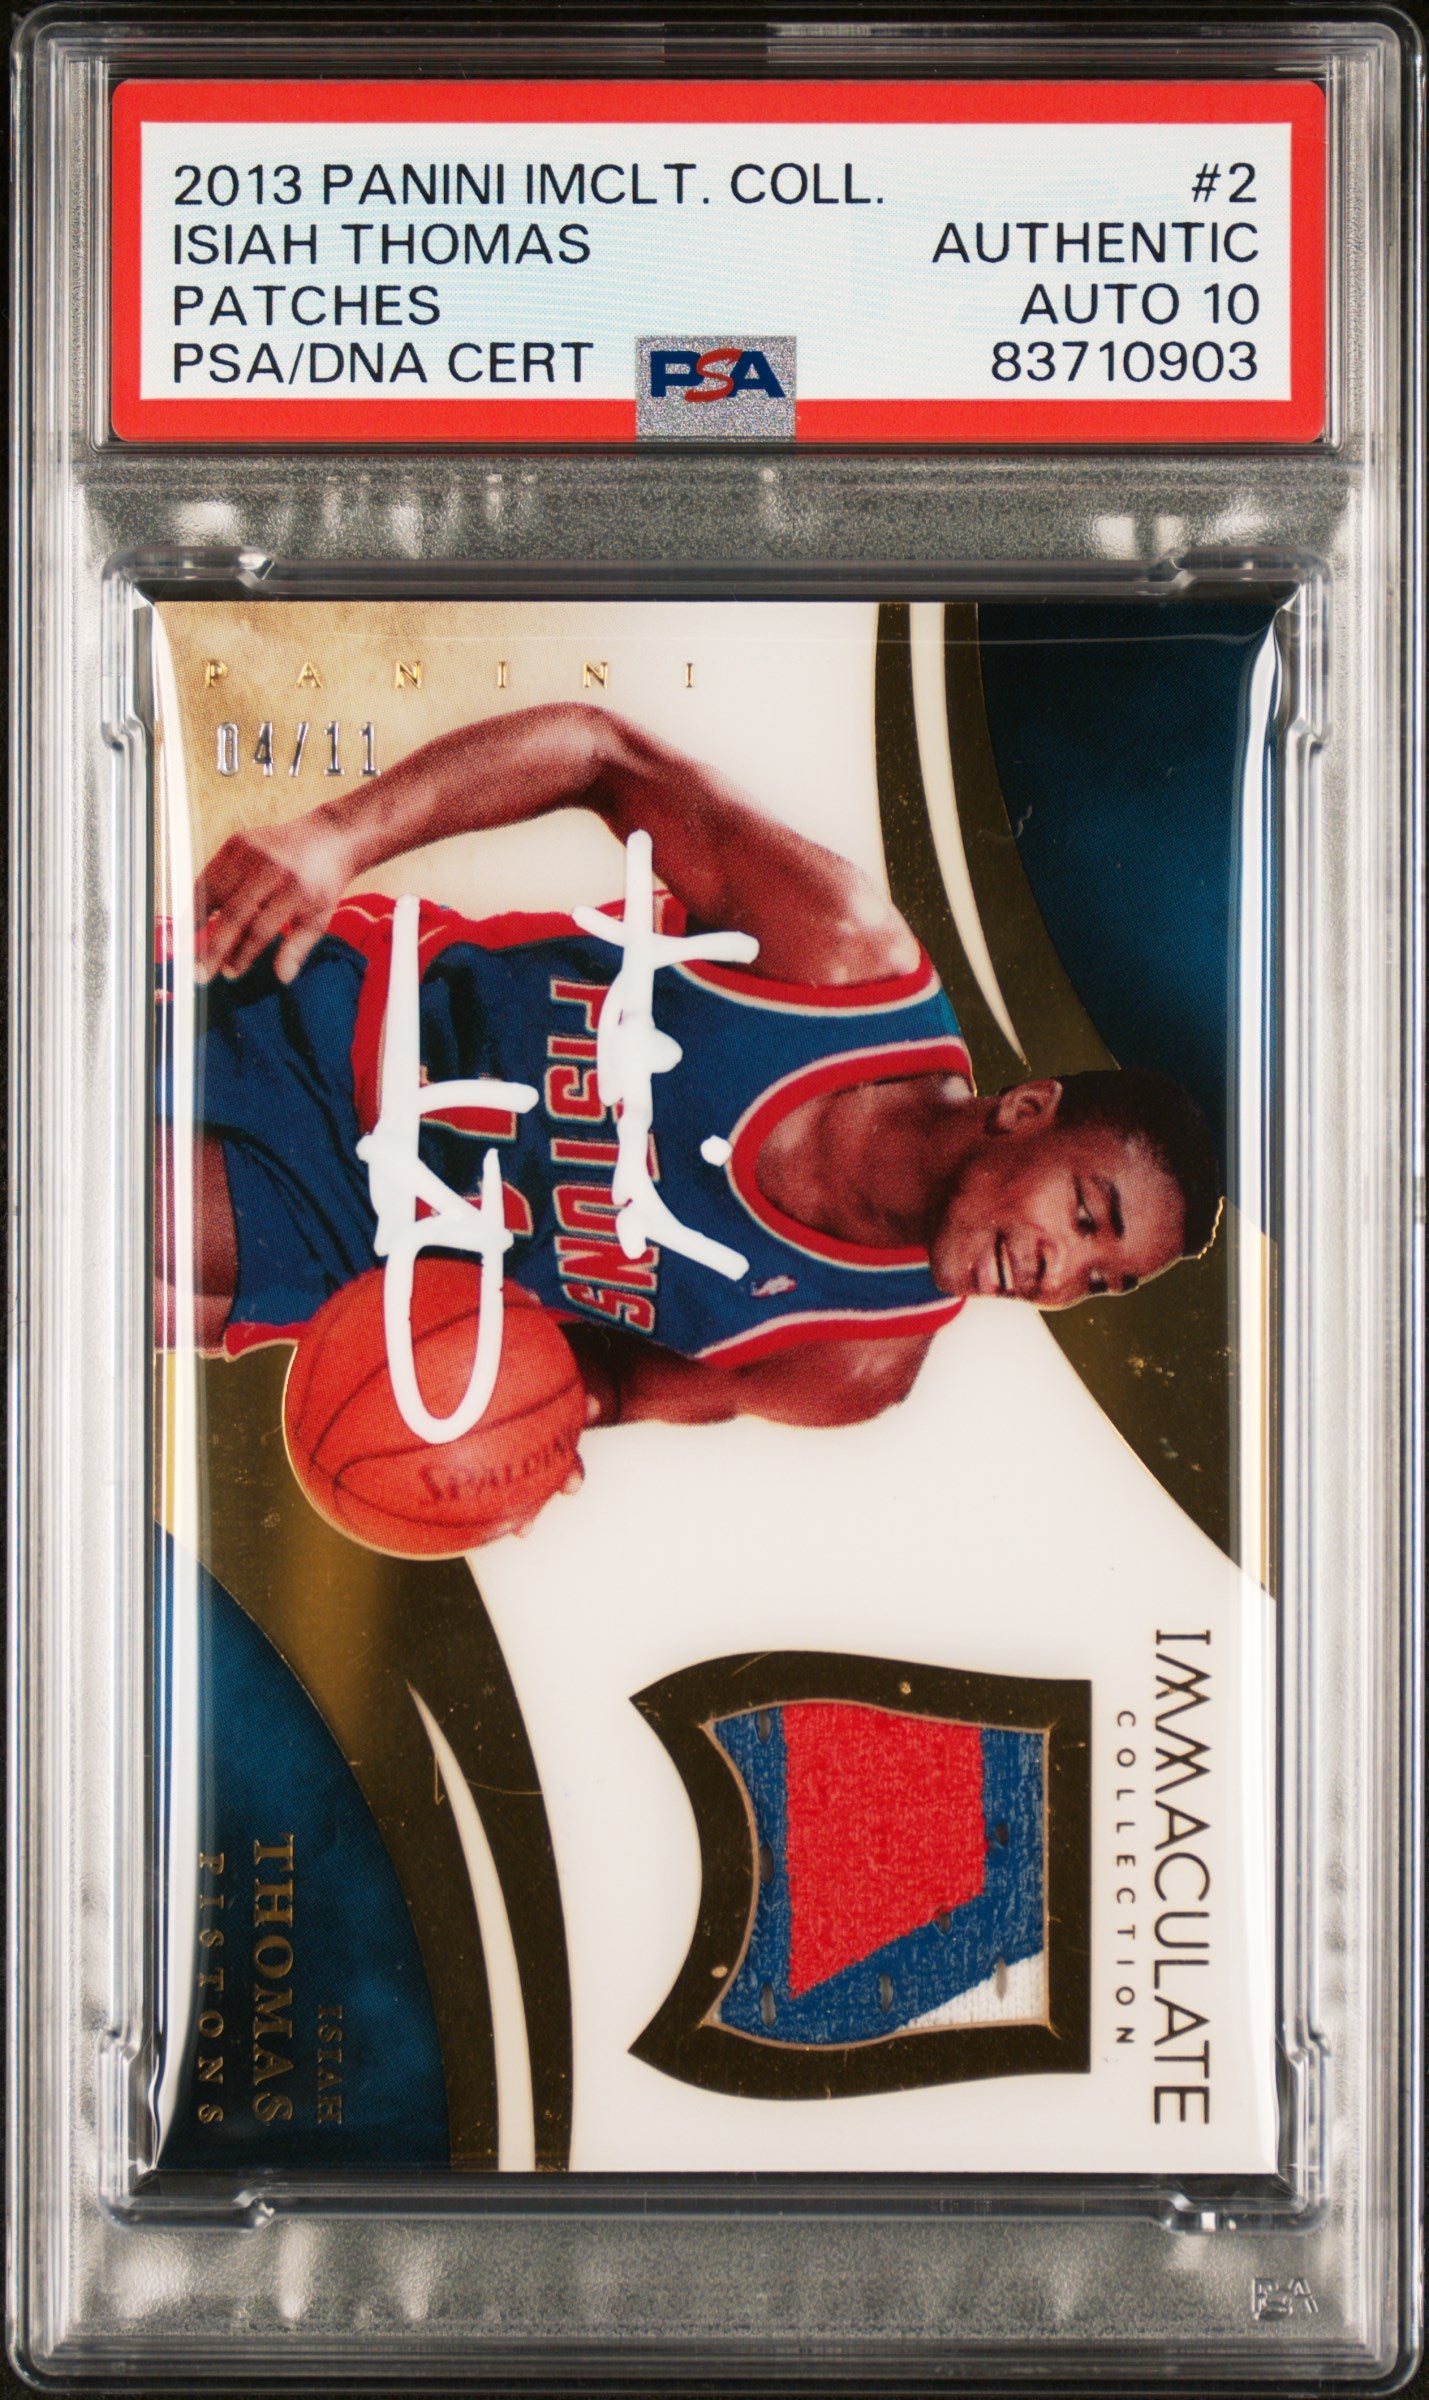 Isiah Thomas 2013 Panini Immaculate Patches Card #2 Auto Graded PSA 10 4/11